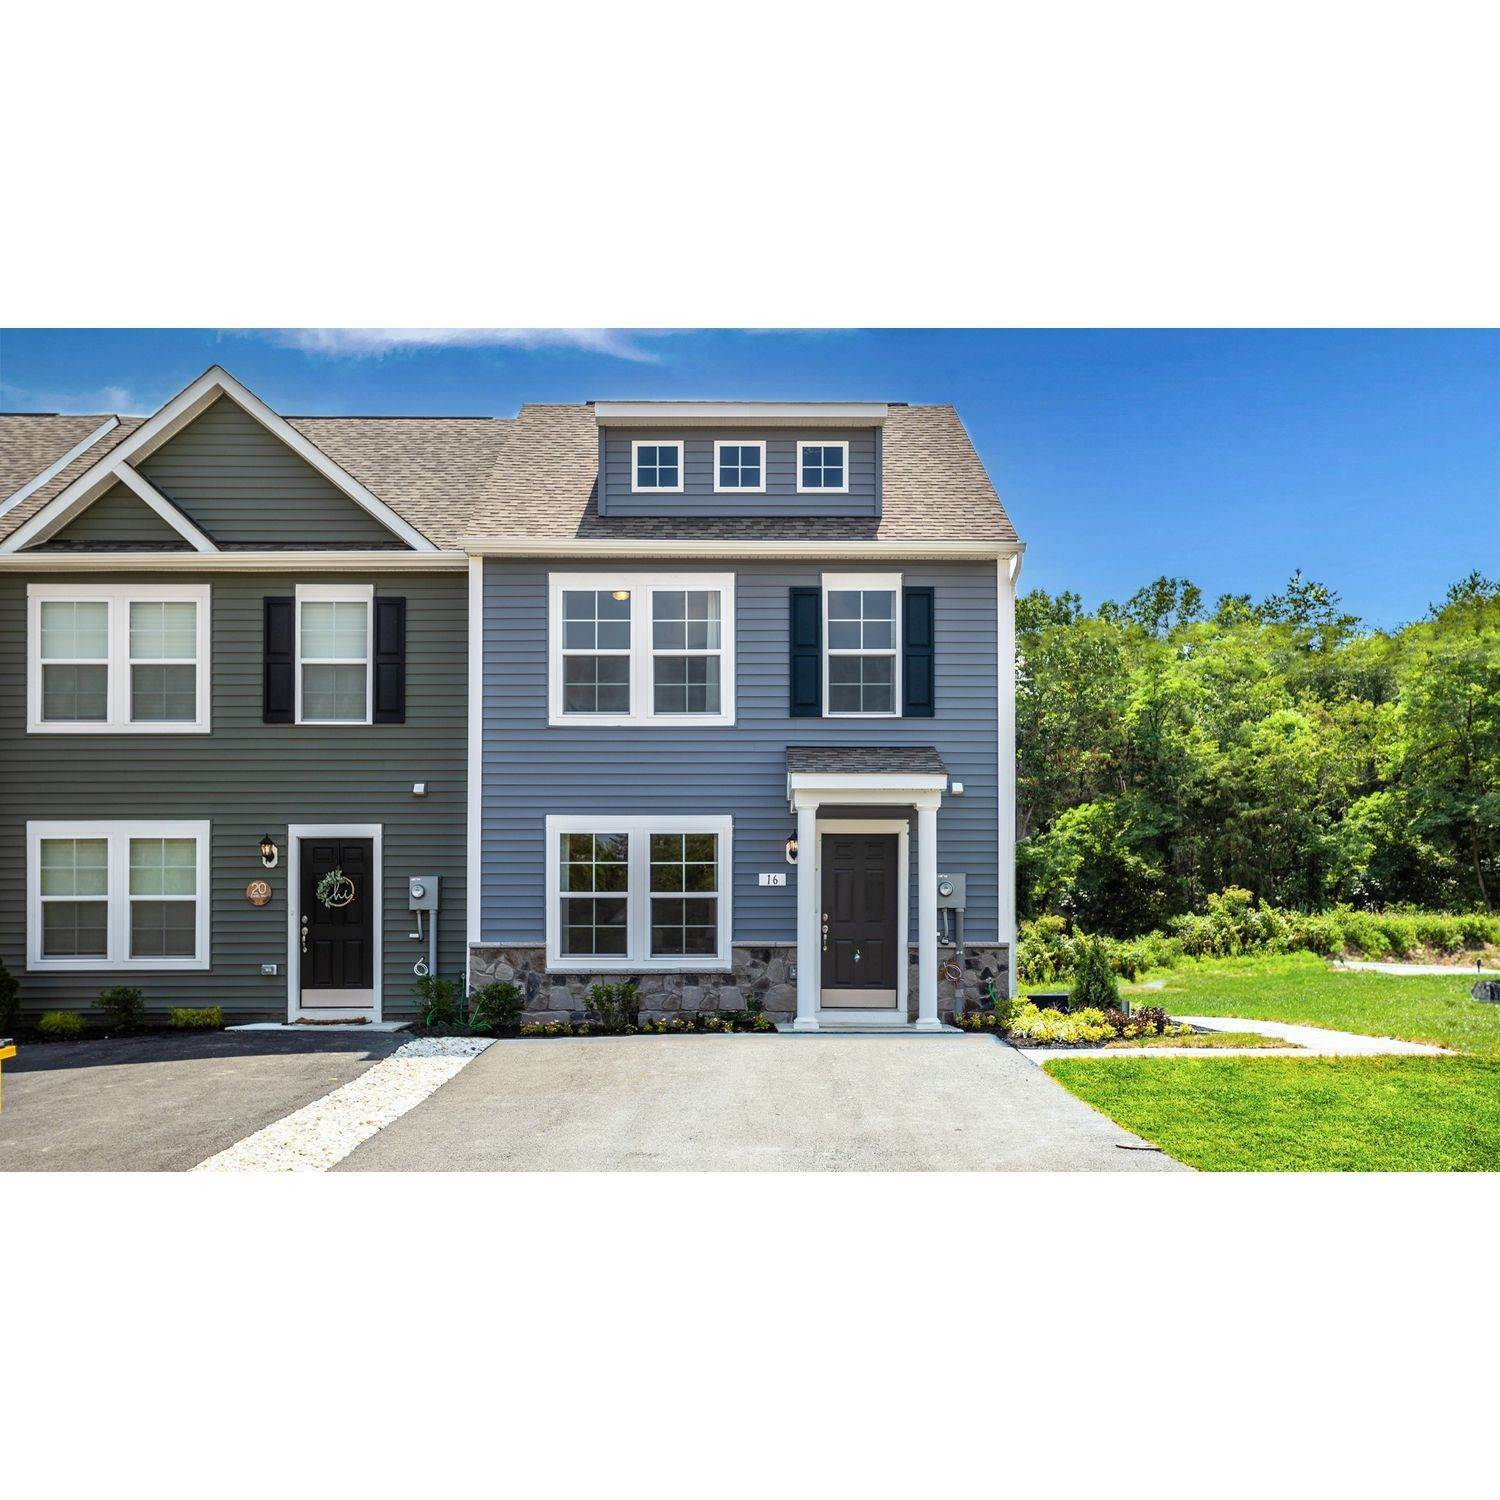 2. Whispering Pines Townhomes κτίριο σε 16 Loblolly Drive, Bunker Hill, WV 25413